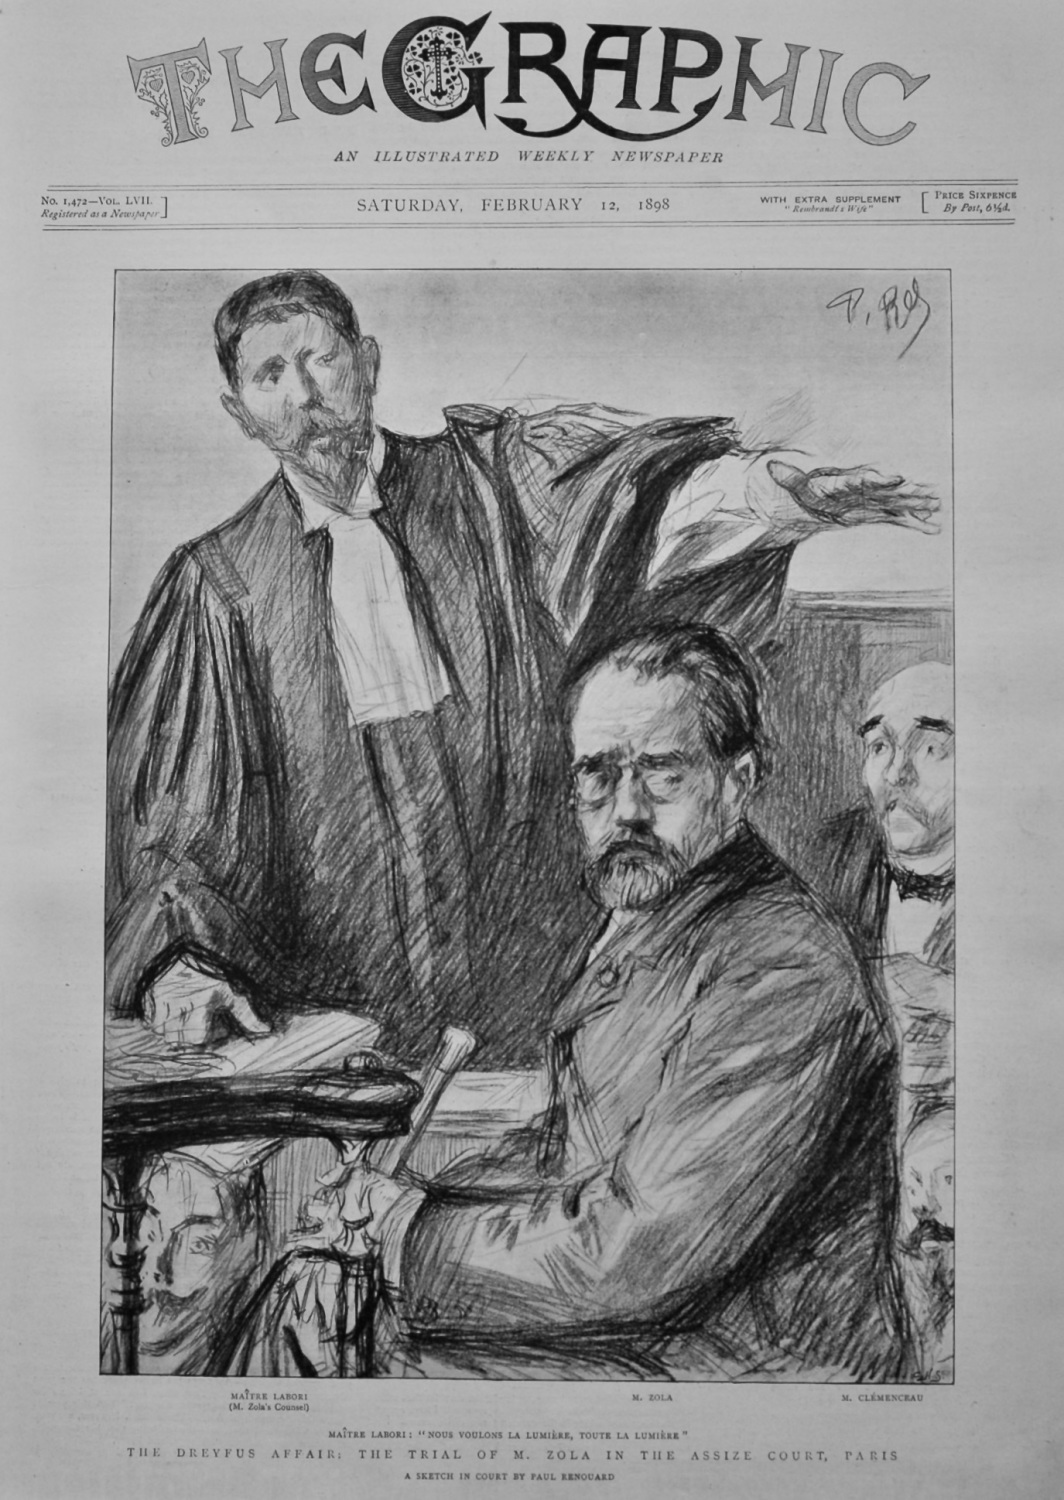 The Dreyfus Affair : The Trial of M. Zola in the Assize Court, Paris.  1898